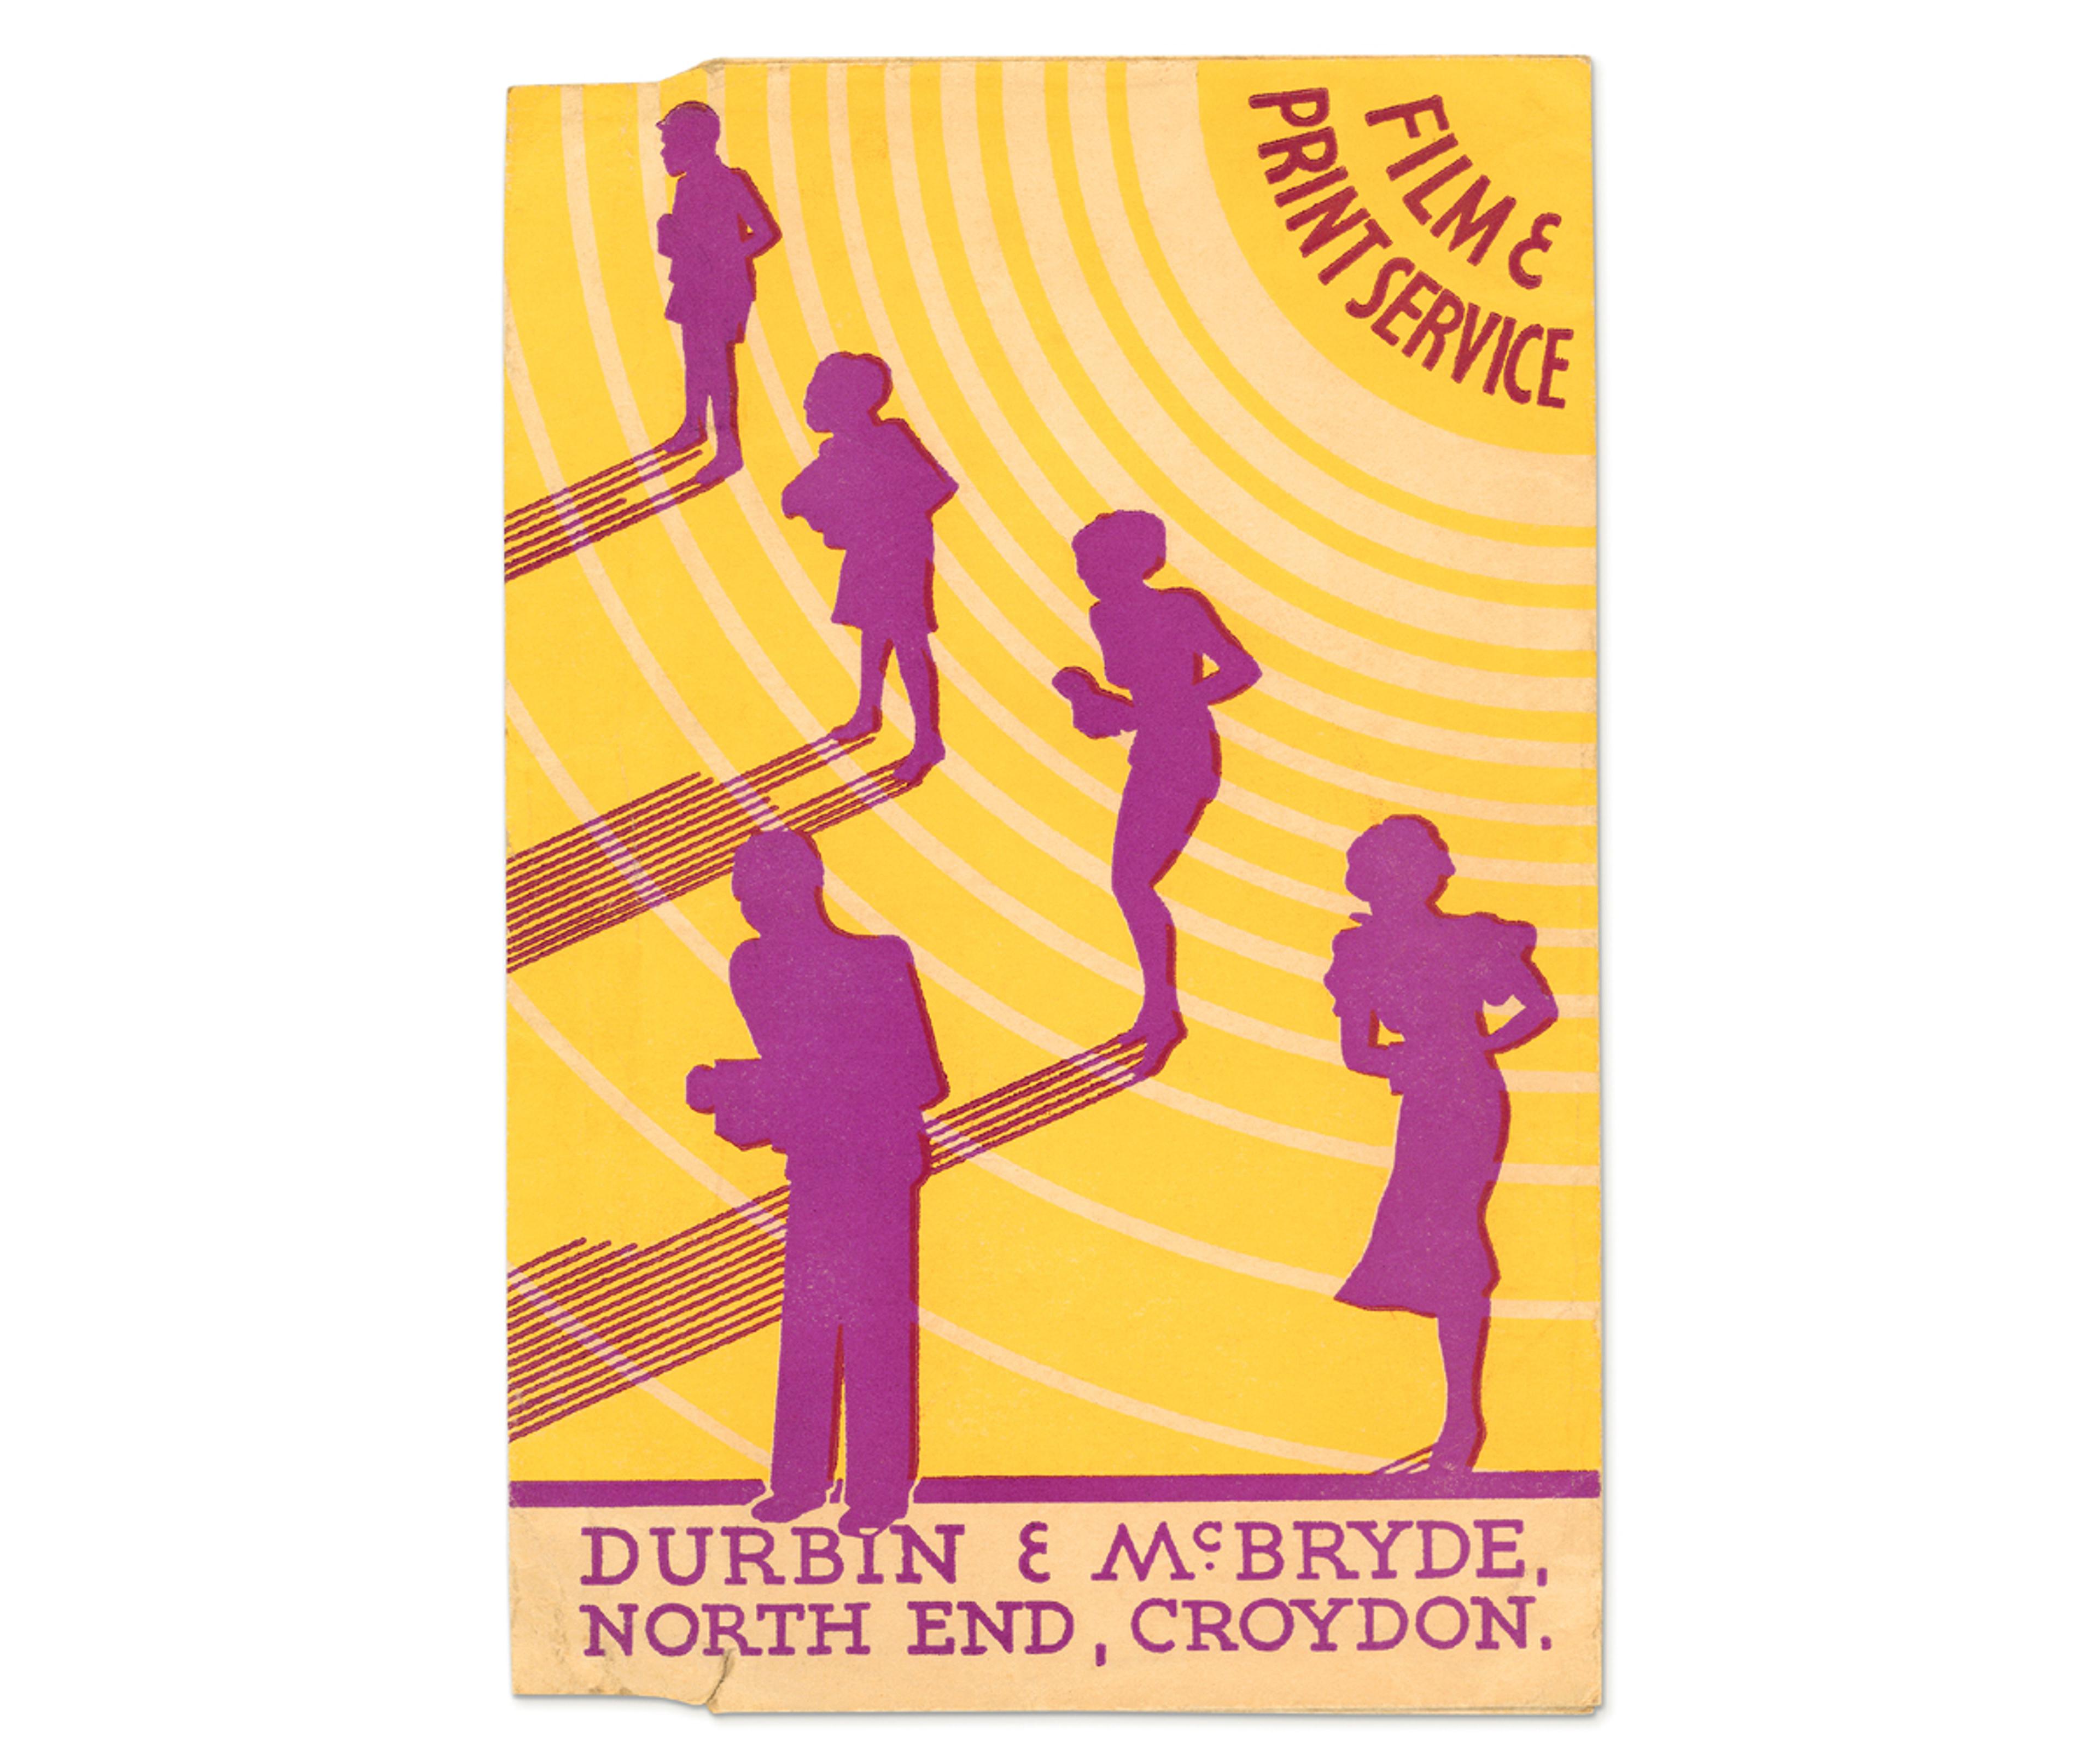 Photograph of a bright yellow photo wallet, with the silhouettes of five people with cameras in their hands, with their backs to the sun and the text 'Film & Print Service' and at the bottom the text 'Durbin & McBryde, North End, Croydon.